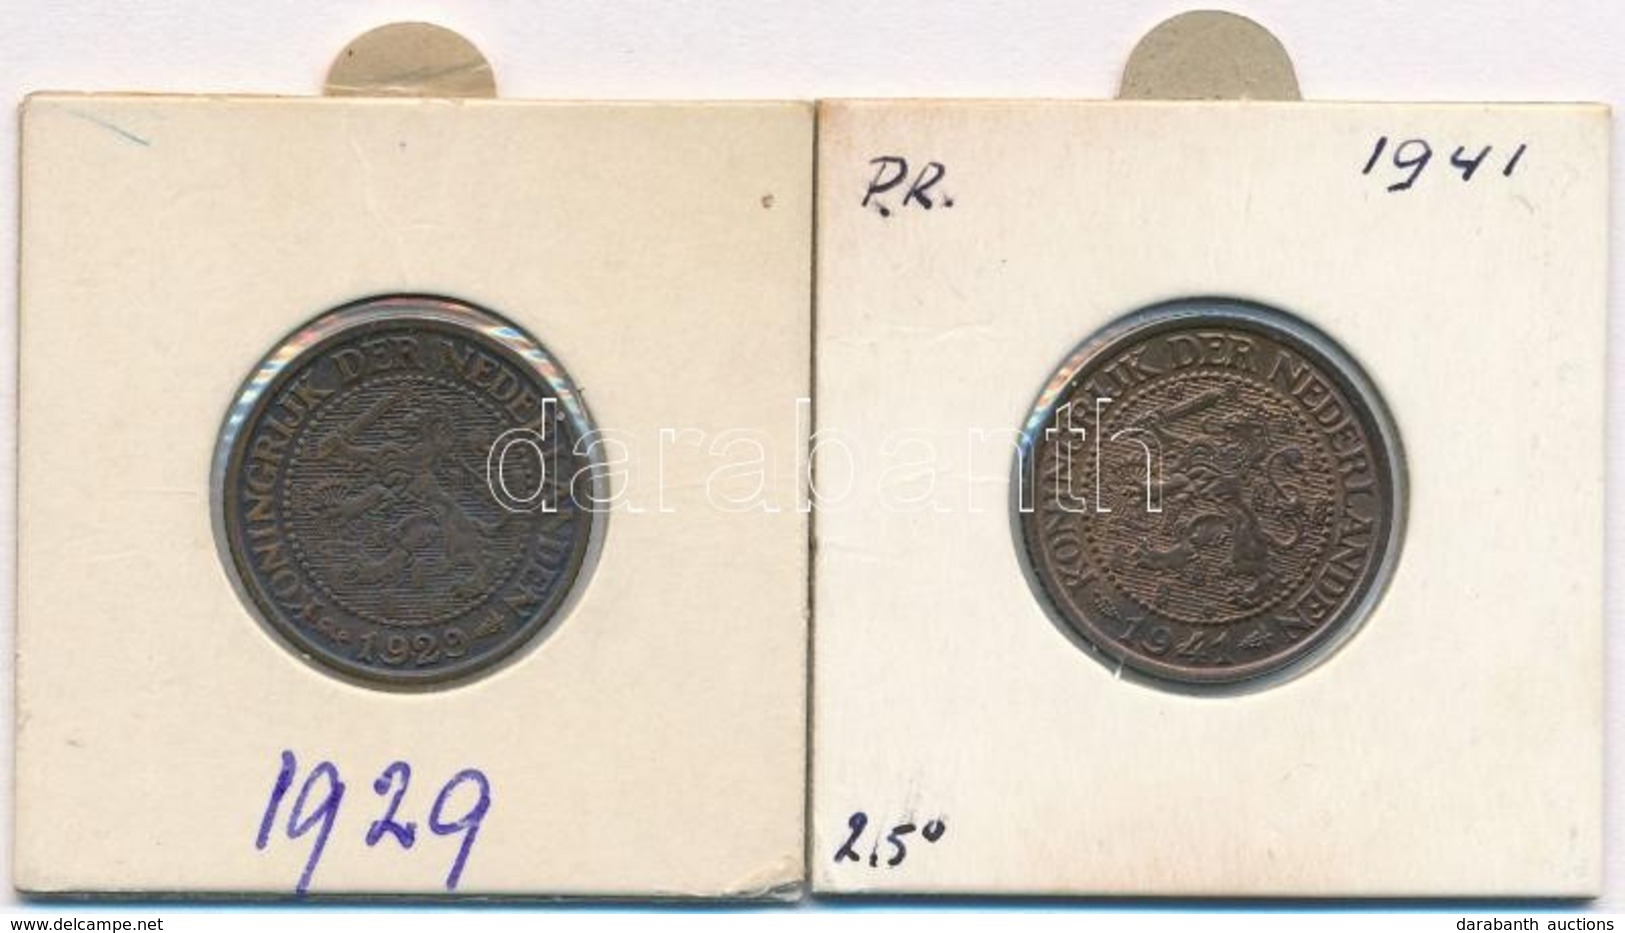 Hollandia 1929-1941. 2 1/2c Br (2x) T:1- Kis Patina 
Netherlands 1929-1941. 2 1/2 Cents (2x) Br C:AU Small Patina
Krause - Unclassified